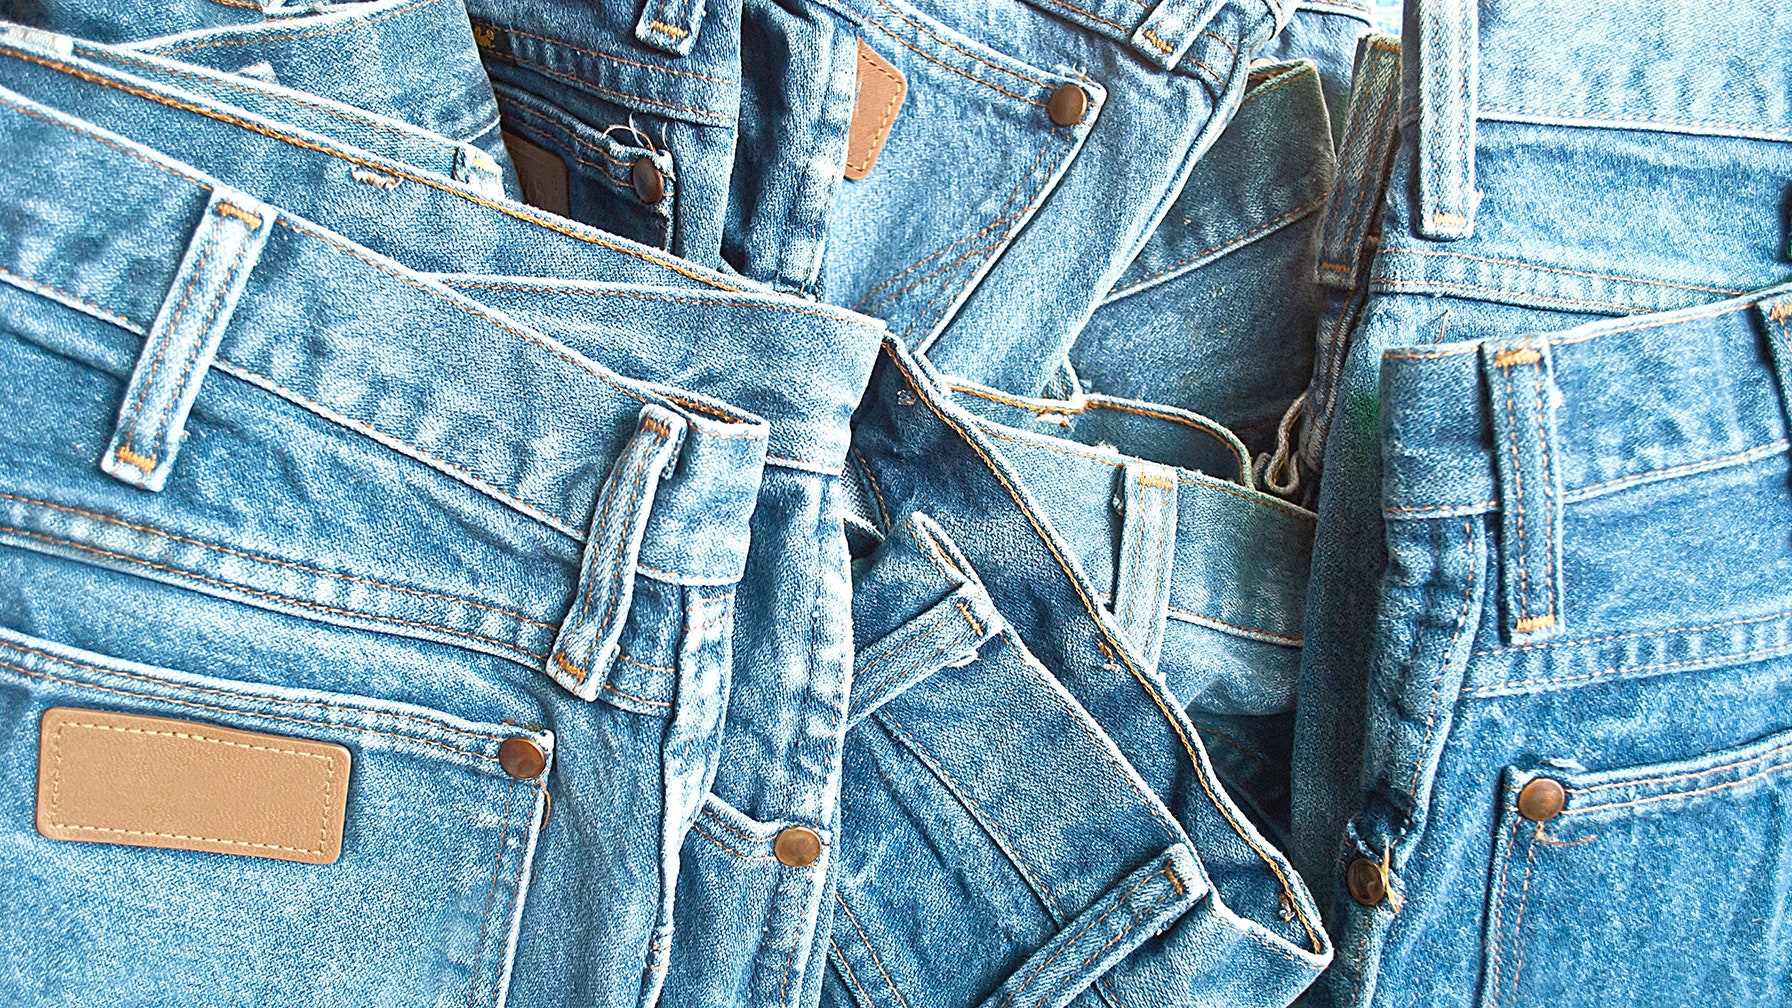 Mexican jeans exports totaled US$156 million in 2021